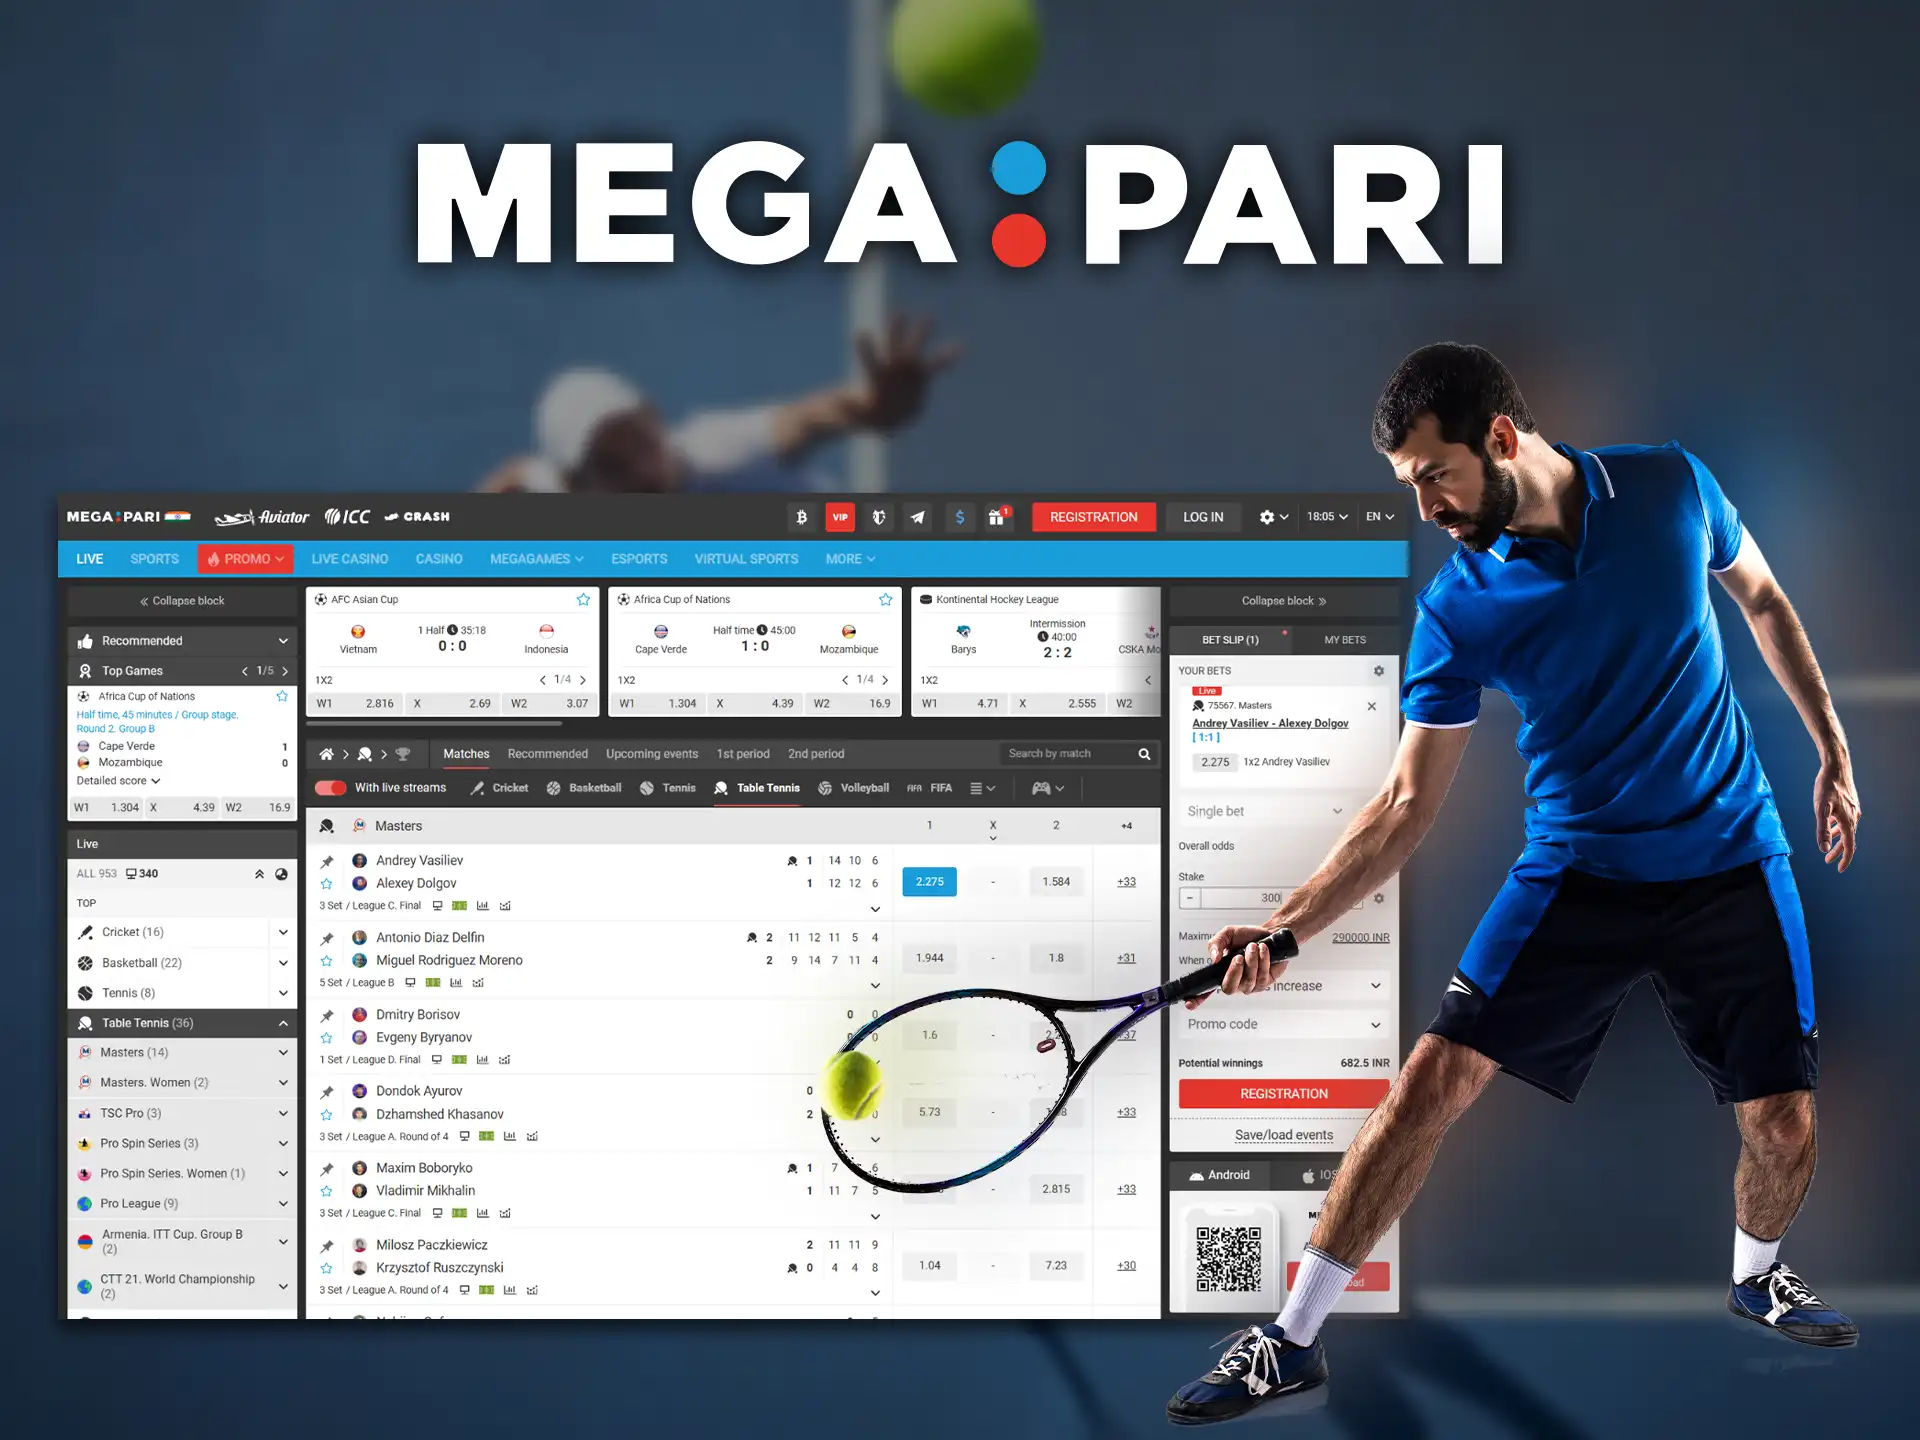 Place your tennis bets in real time, right on the Megapari homepage.